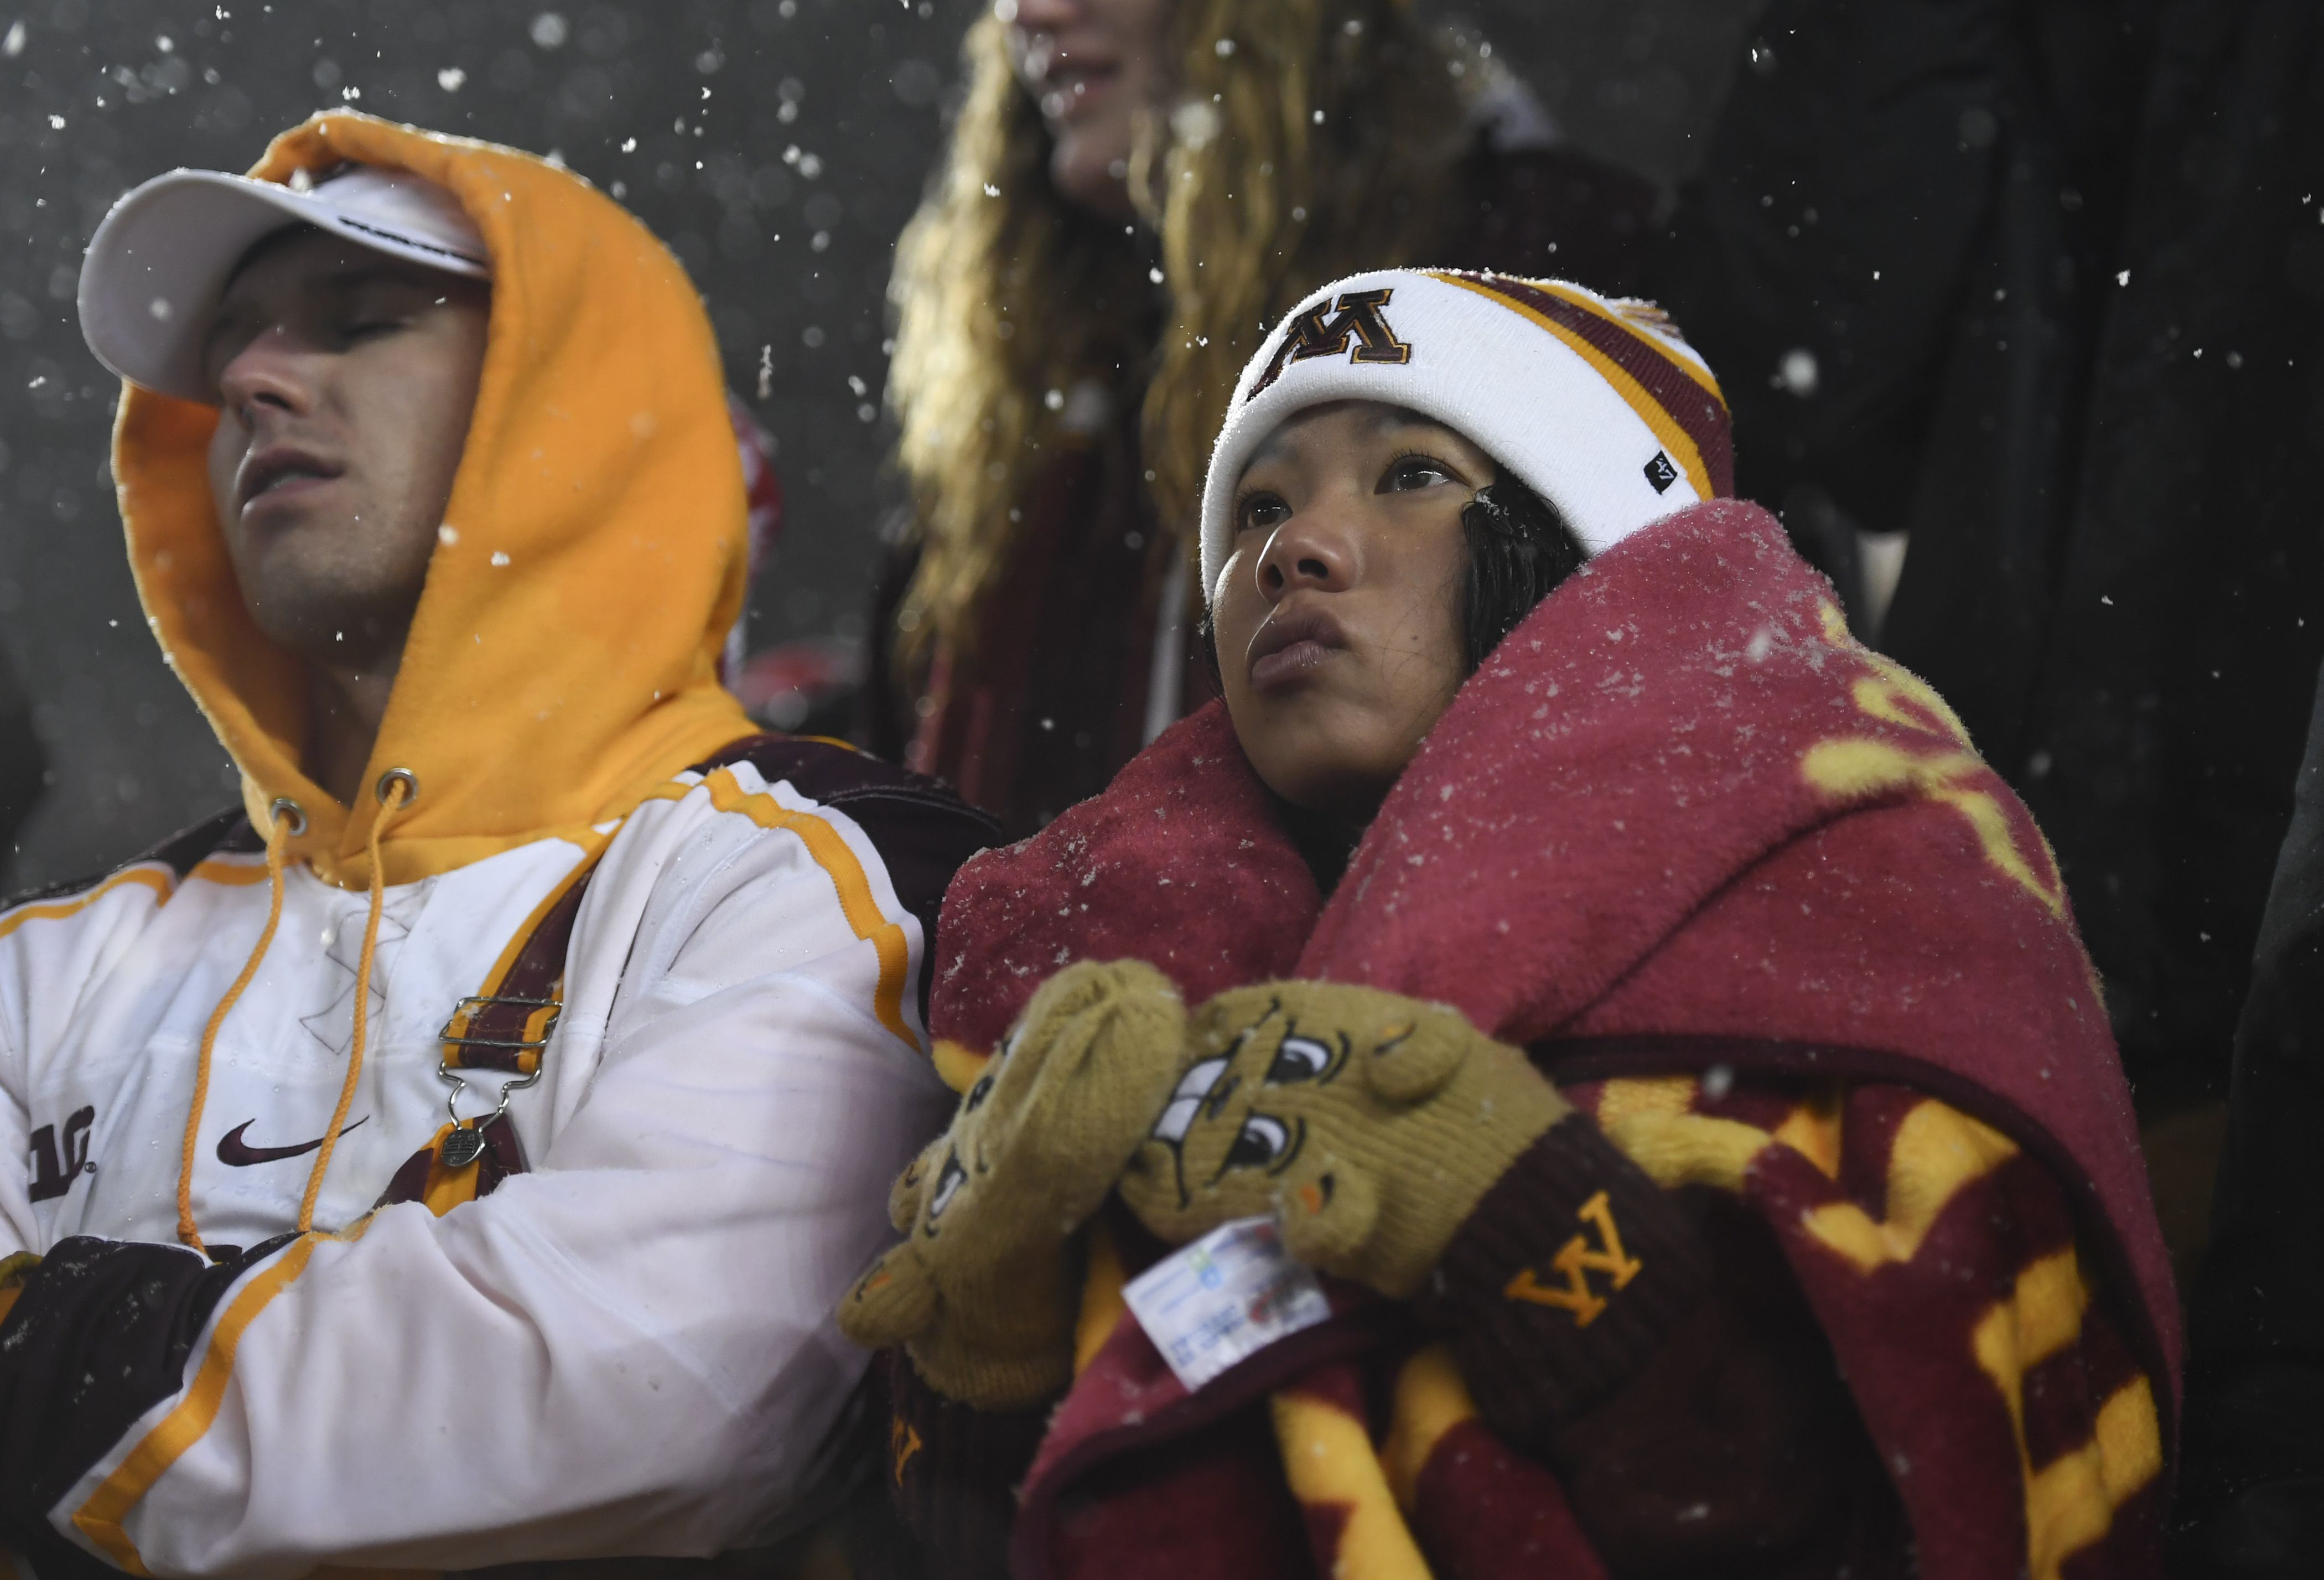 Two people in UMN sports outfits looking disappointed.